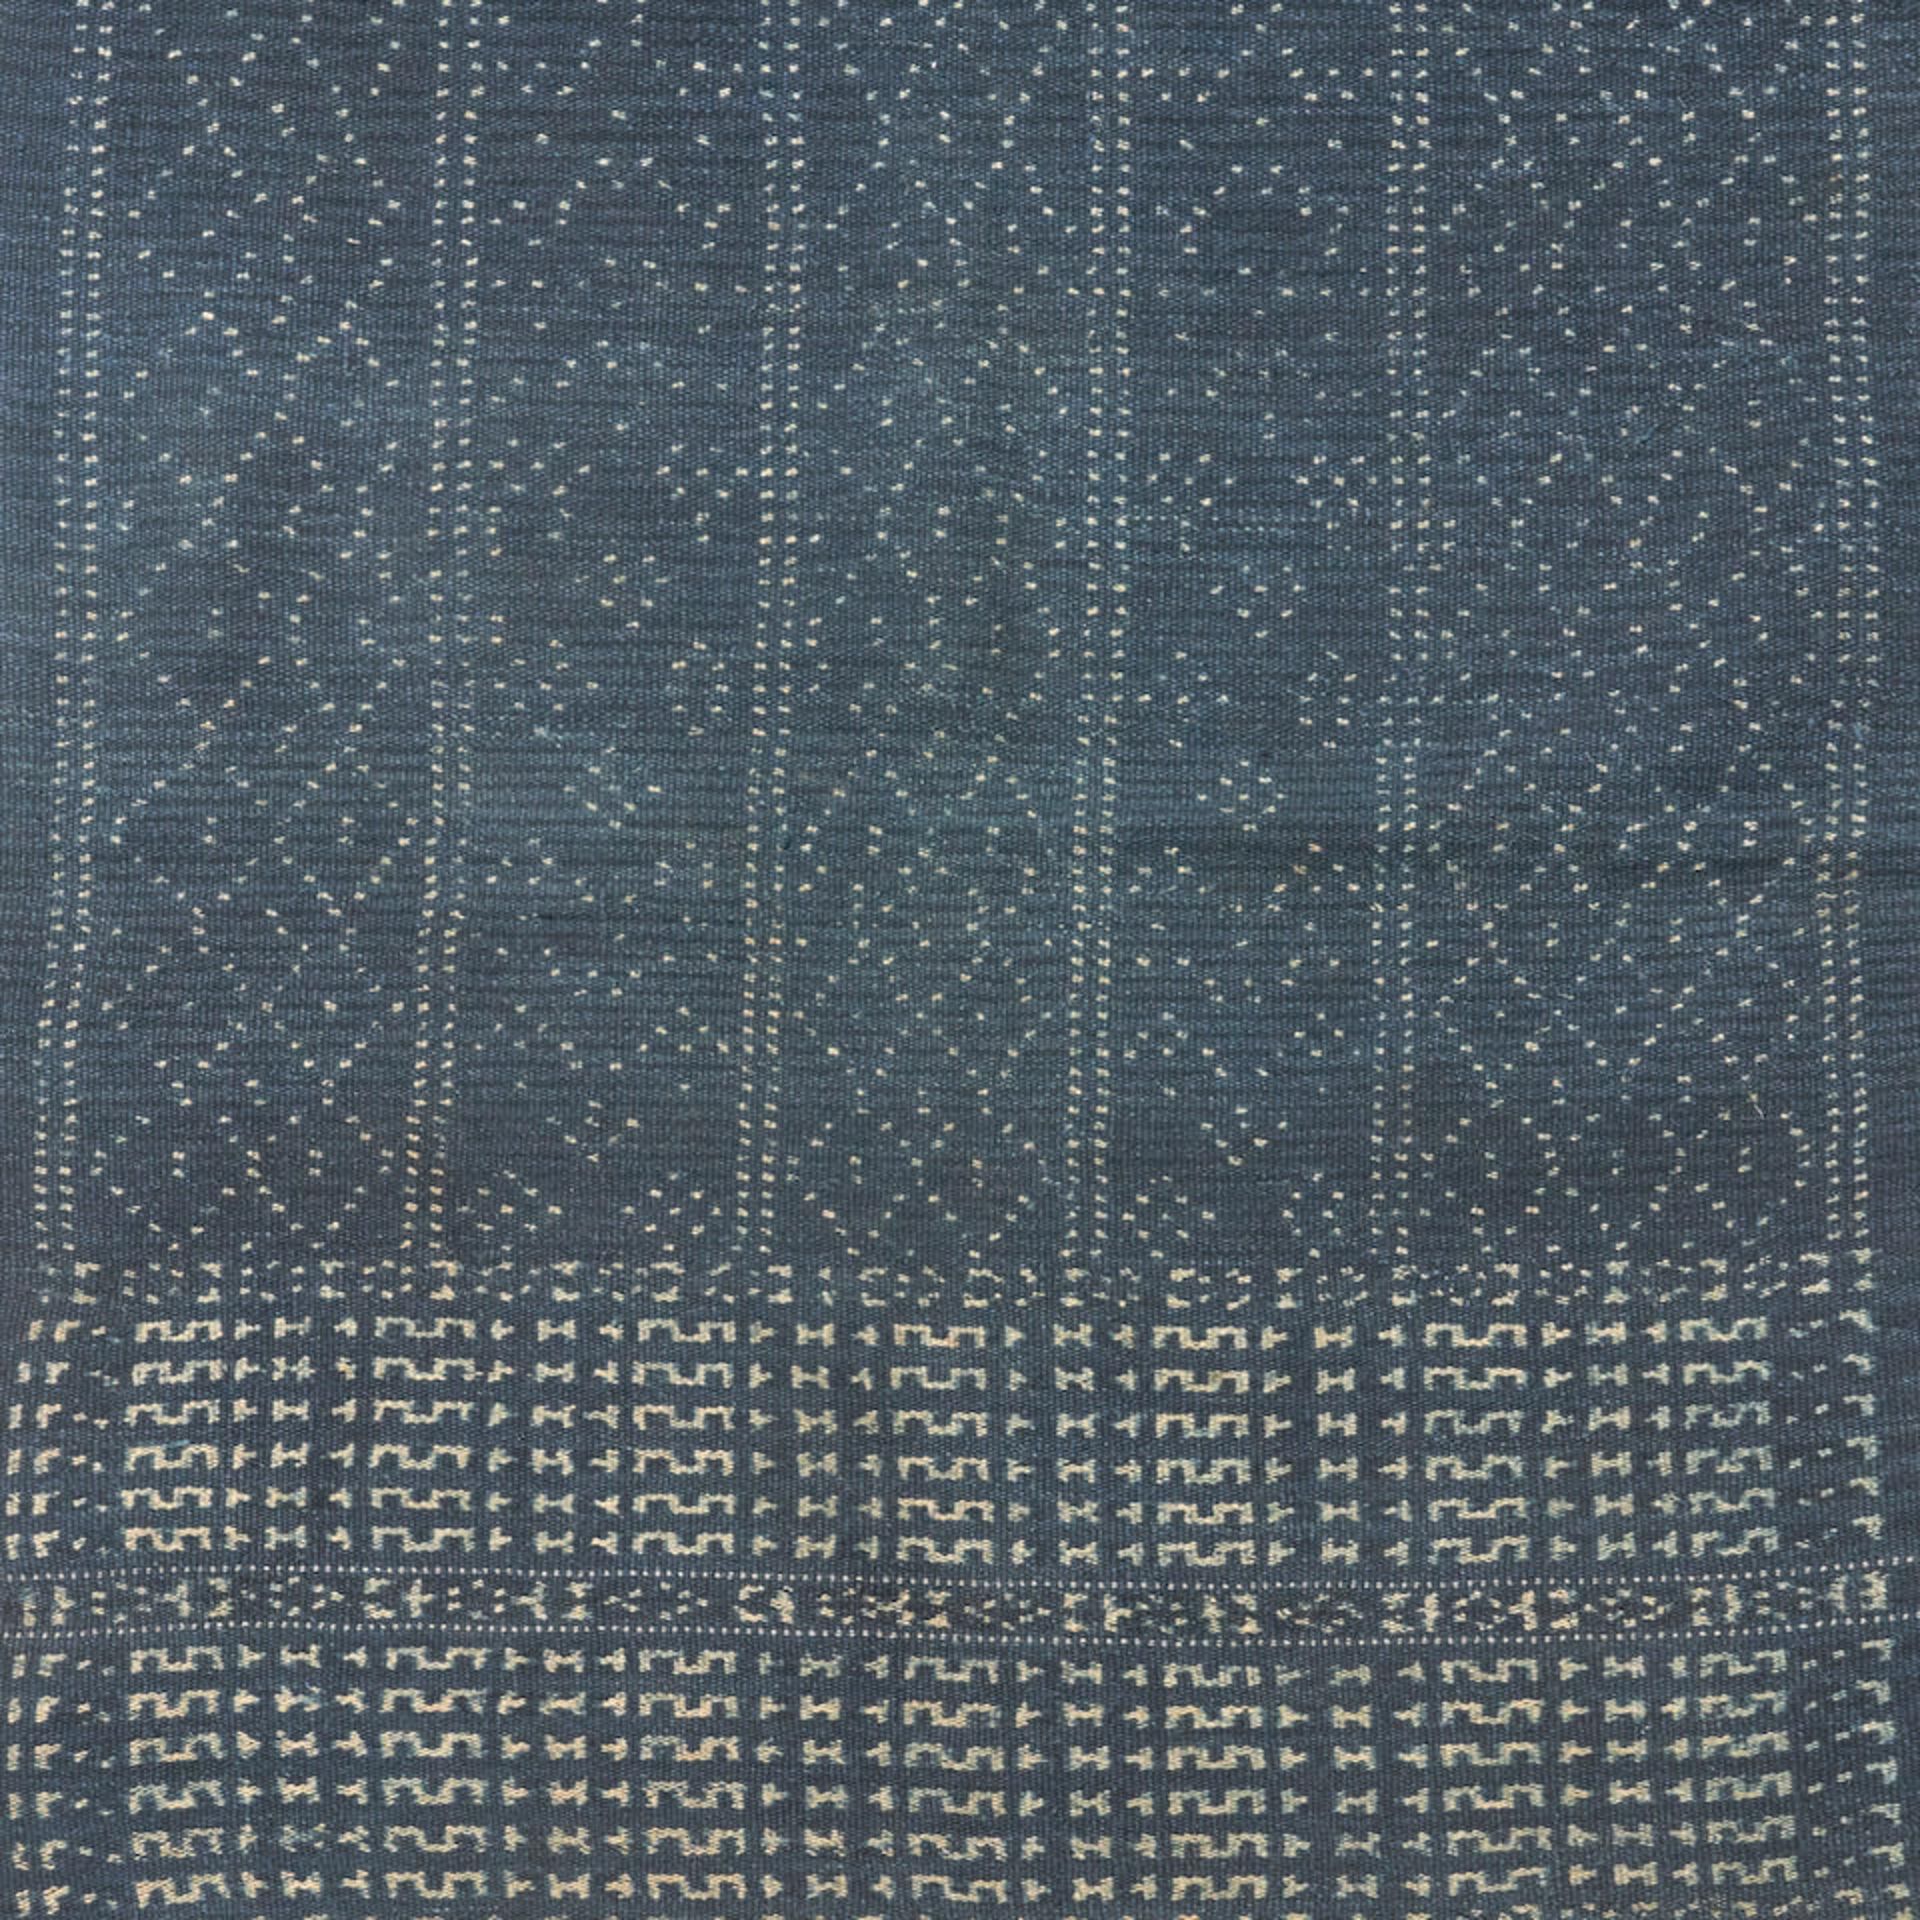 Woman's Patterned Sarong East Flores, Indonesia 23 1/2 in. x 48 in. - Bild 3 aus 3